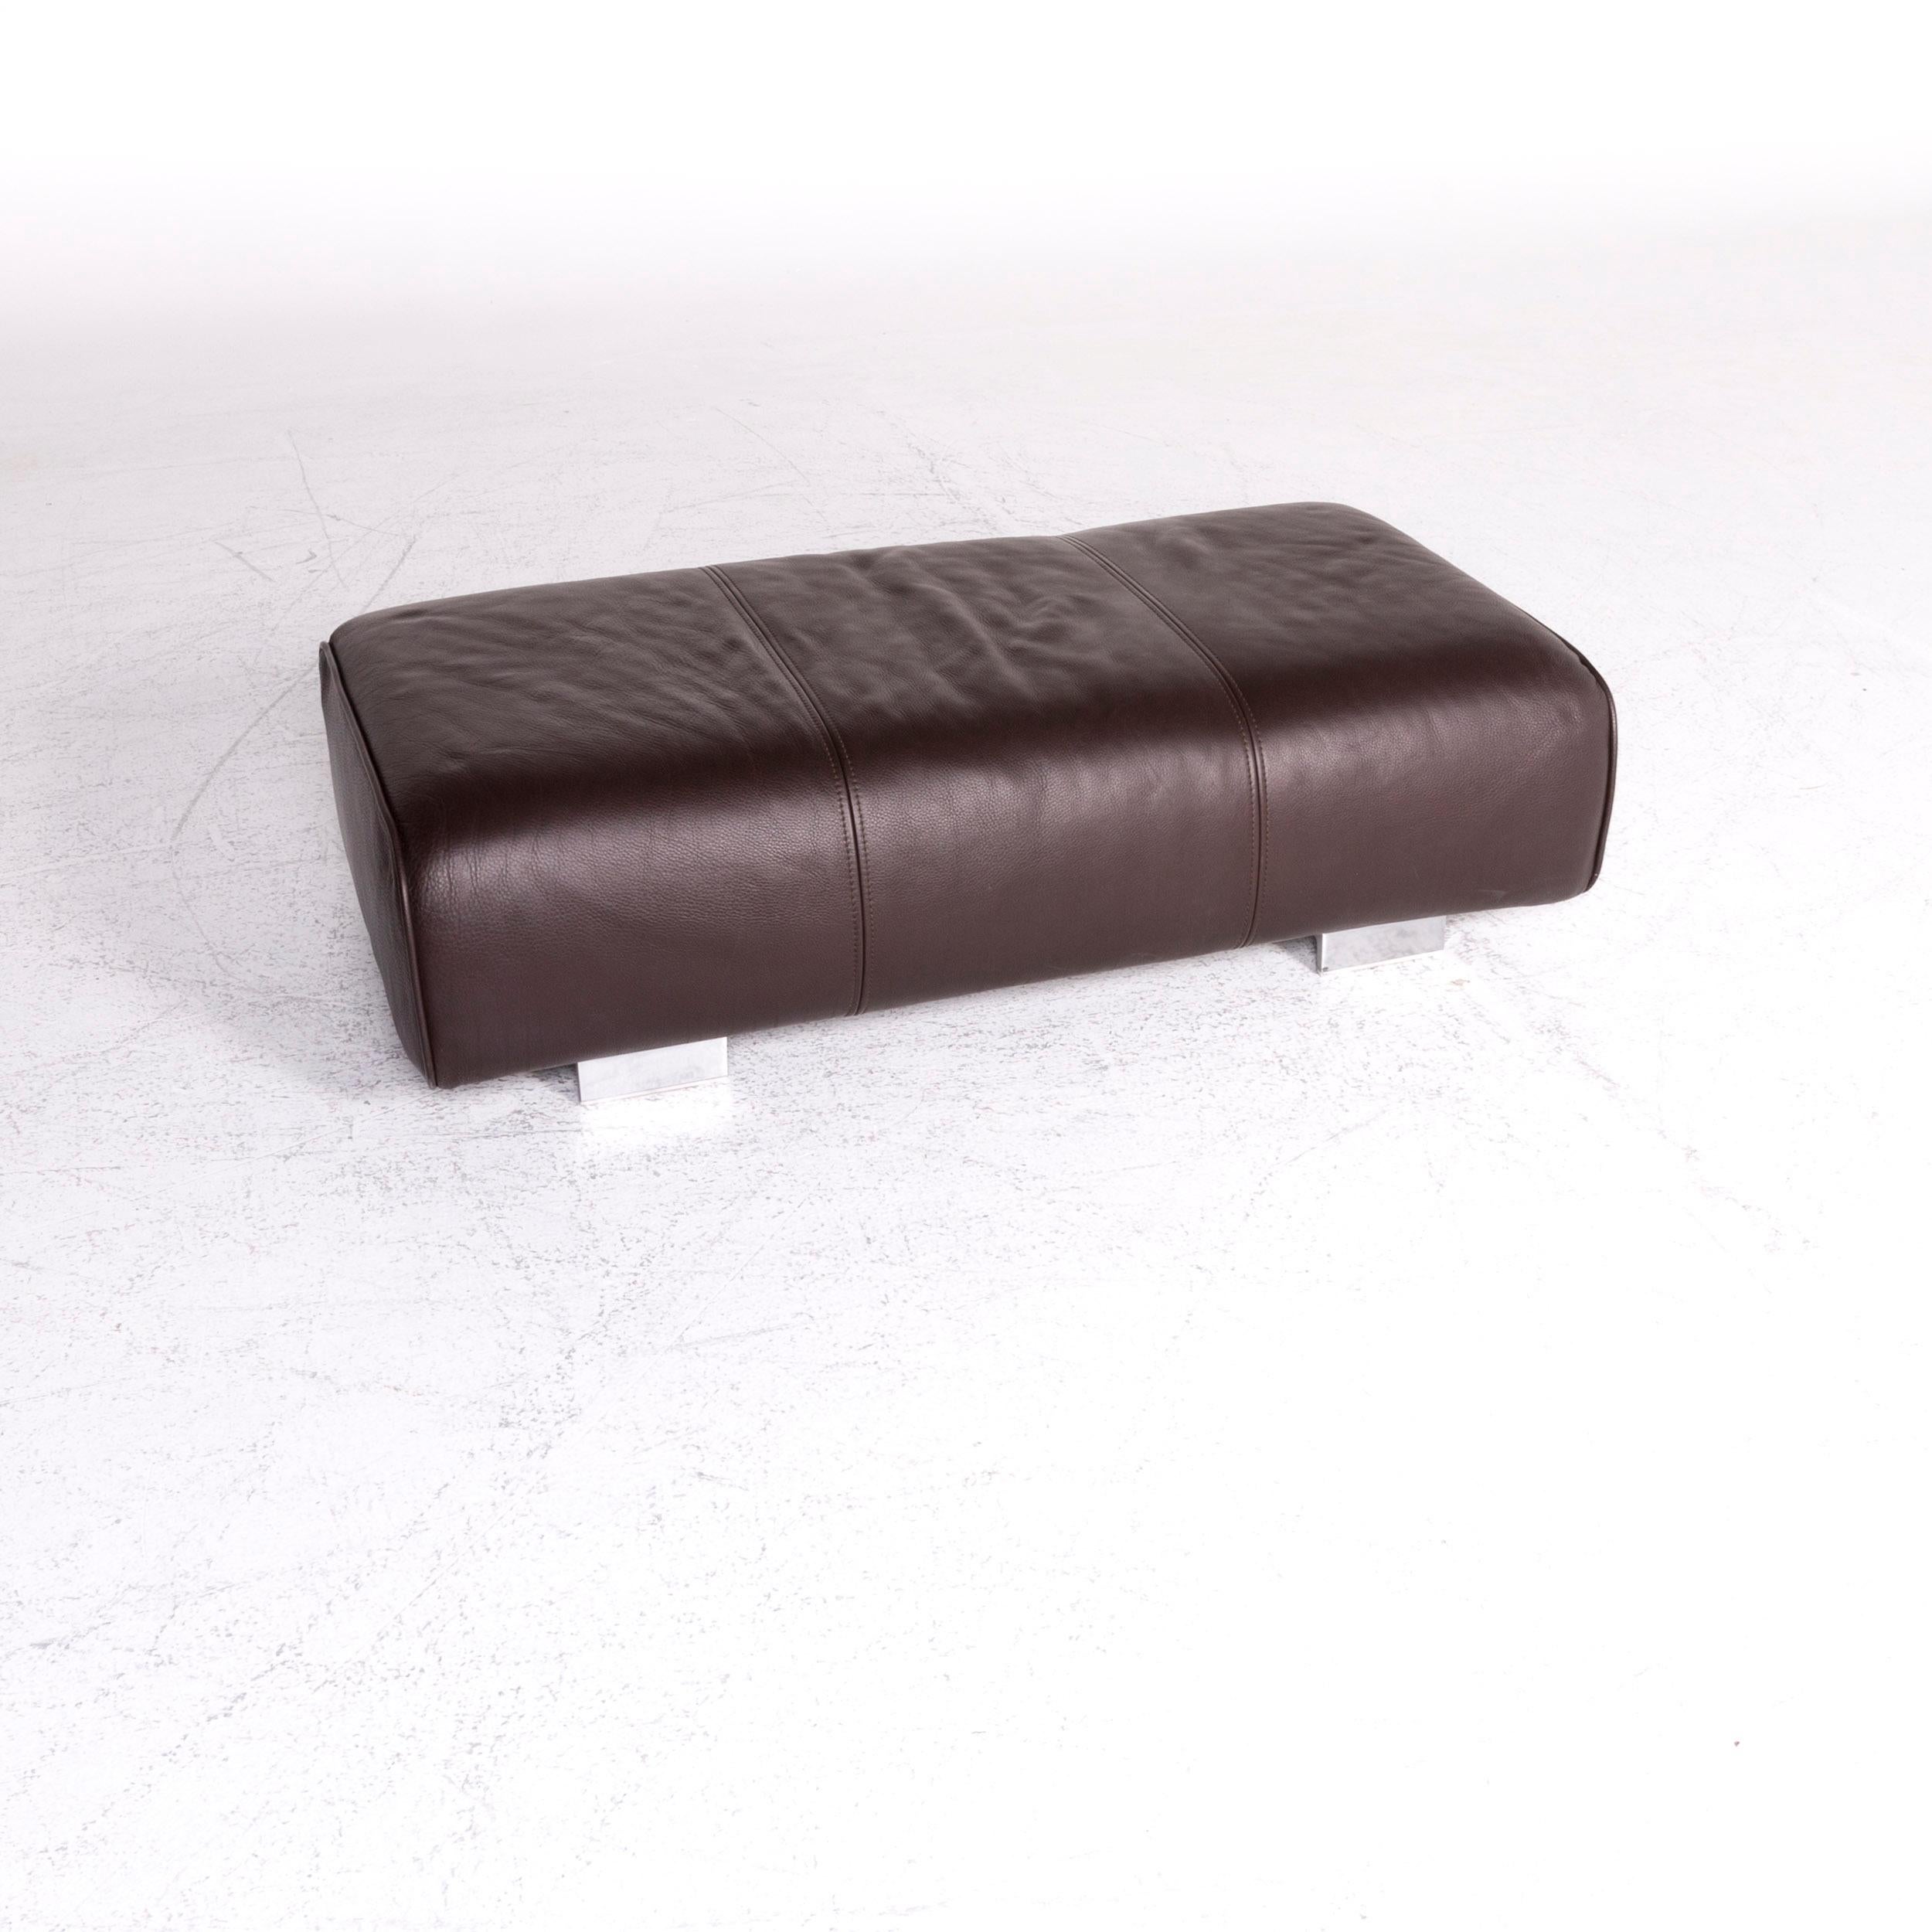 We bring to you a Rolf Benz 6300 designer leather stool brown.

Product measurements in centimeters:

Depth 68
Width 128
Height 37.





 